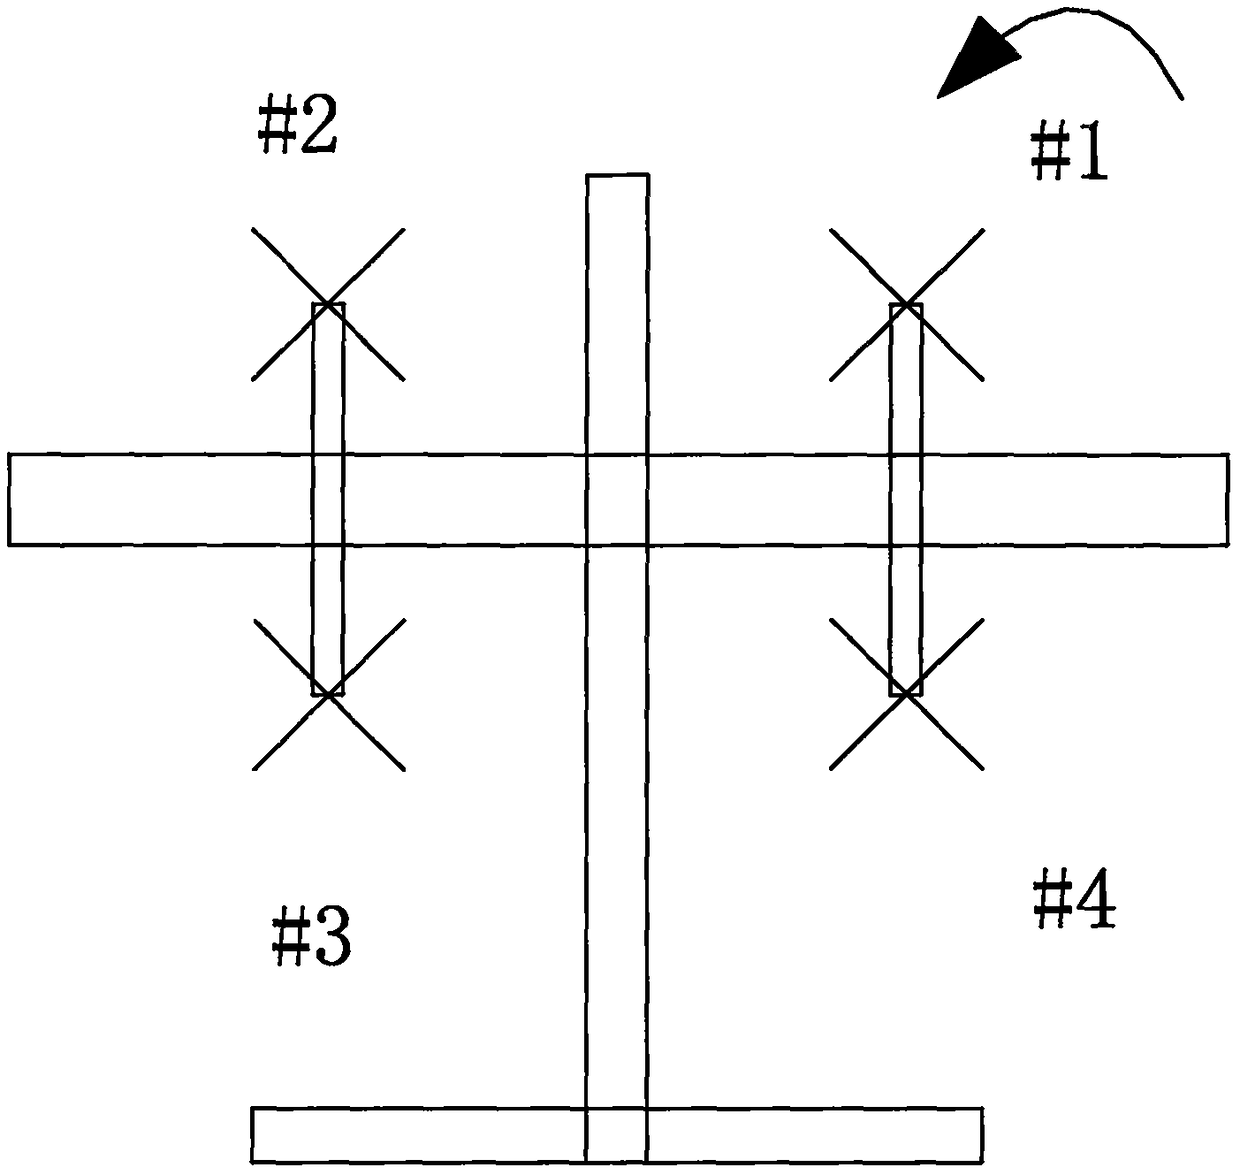 Yaw control method for tilting vertical take-off and landing fixed-wing UAV in rotor wing mode